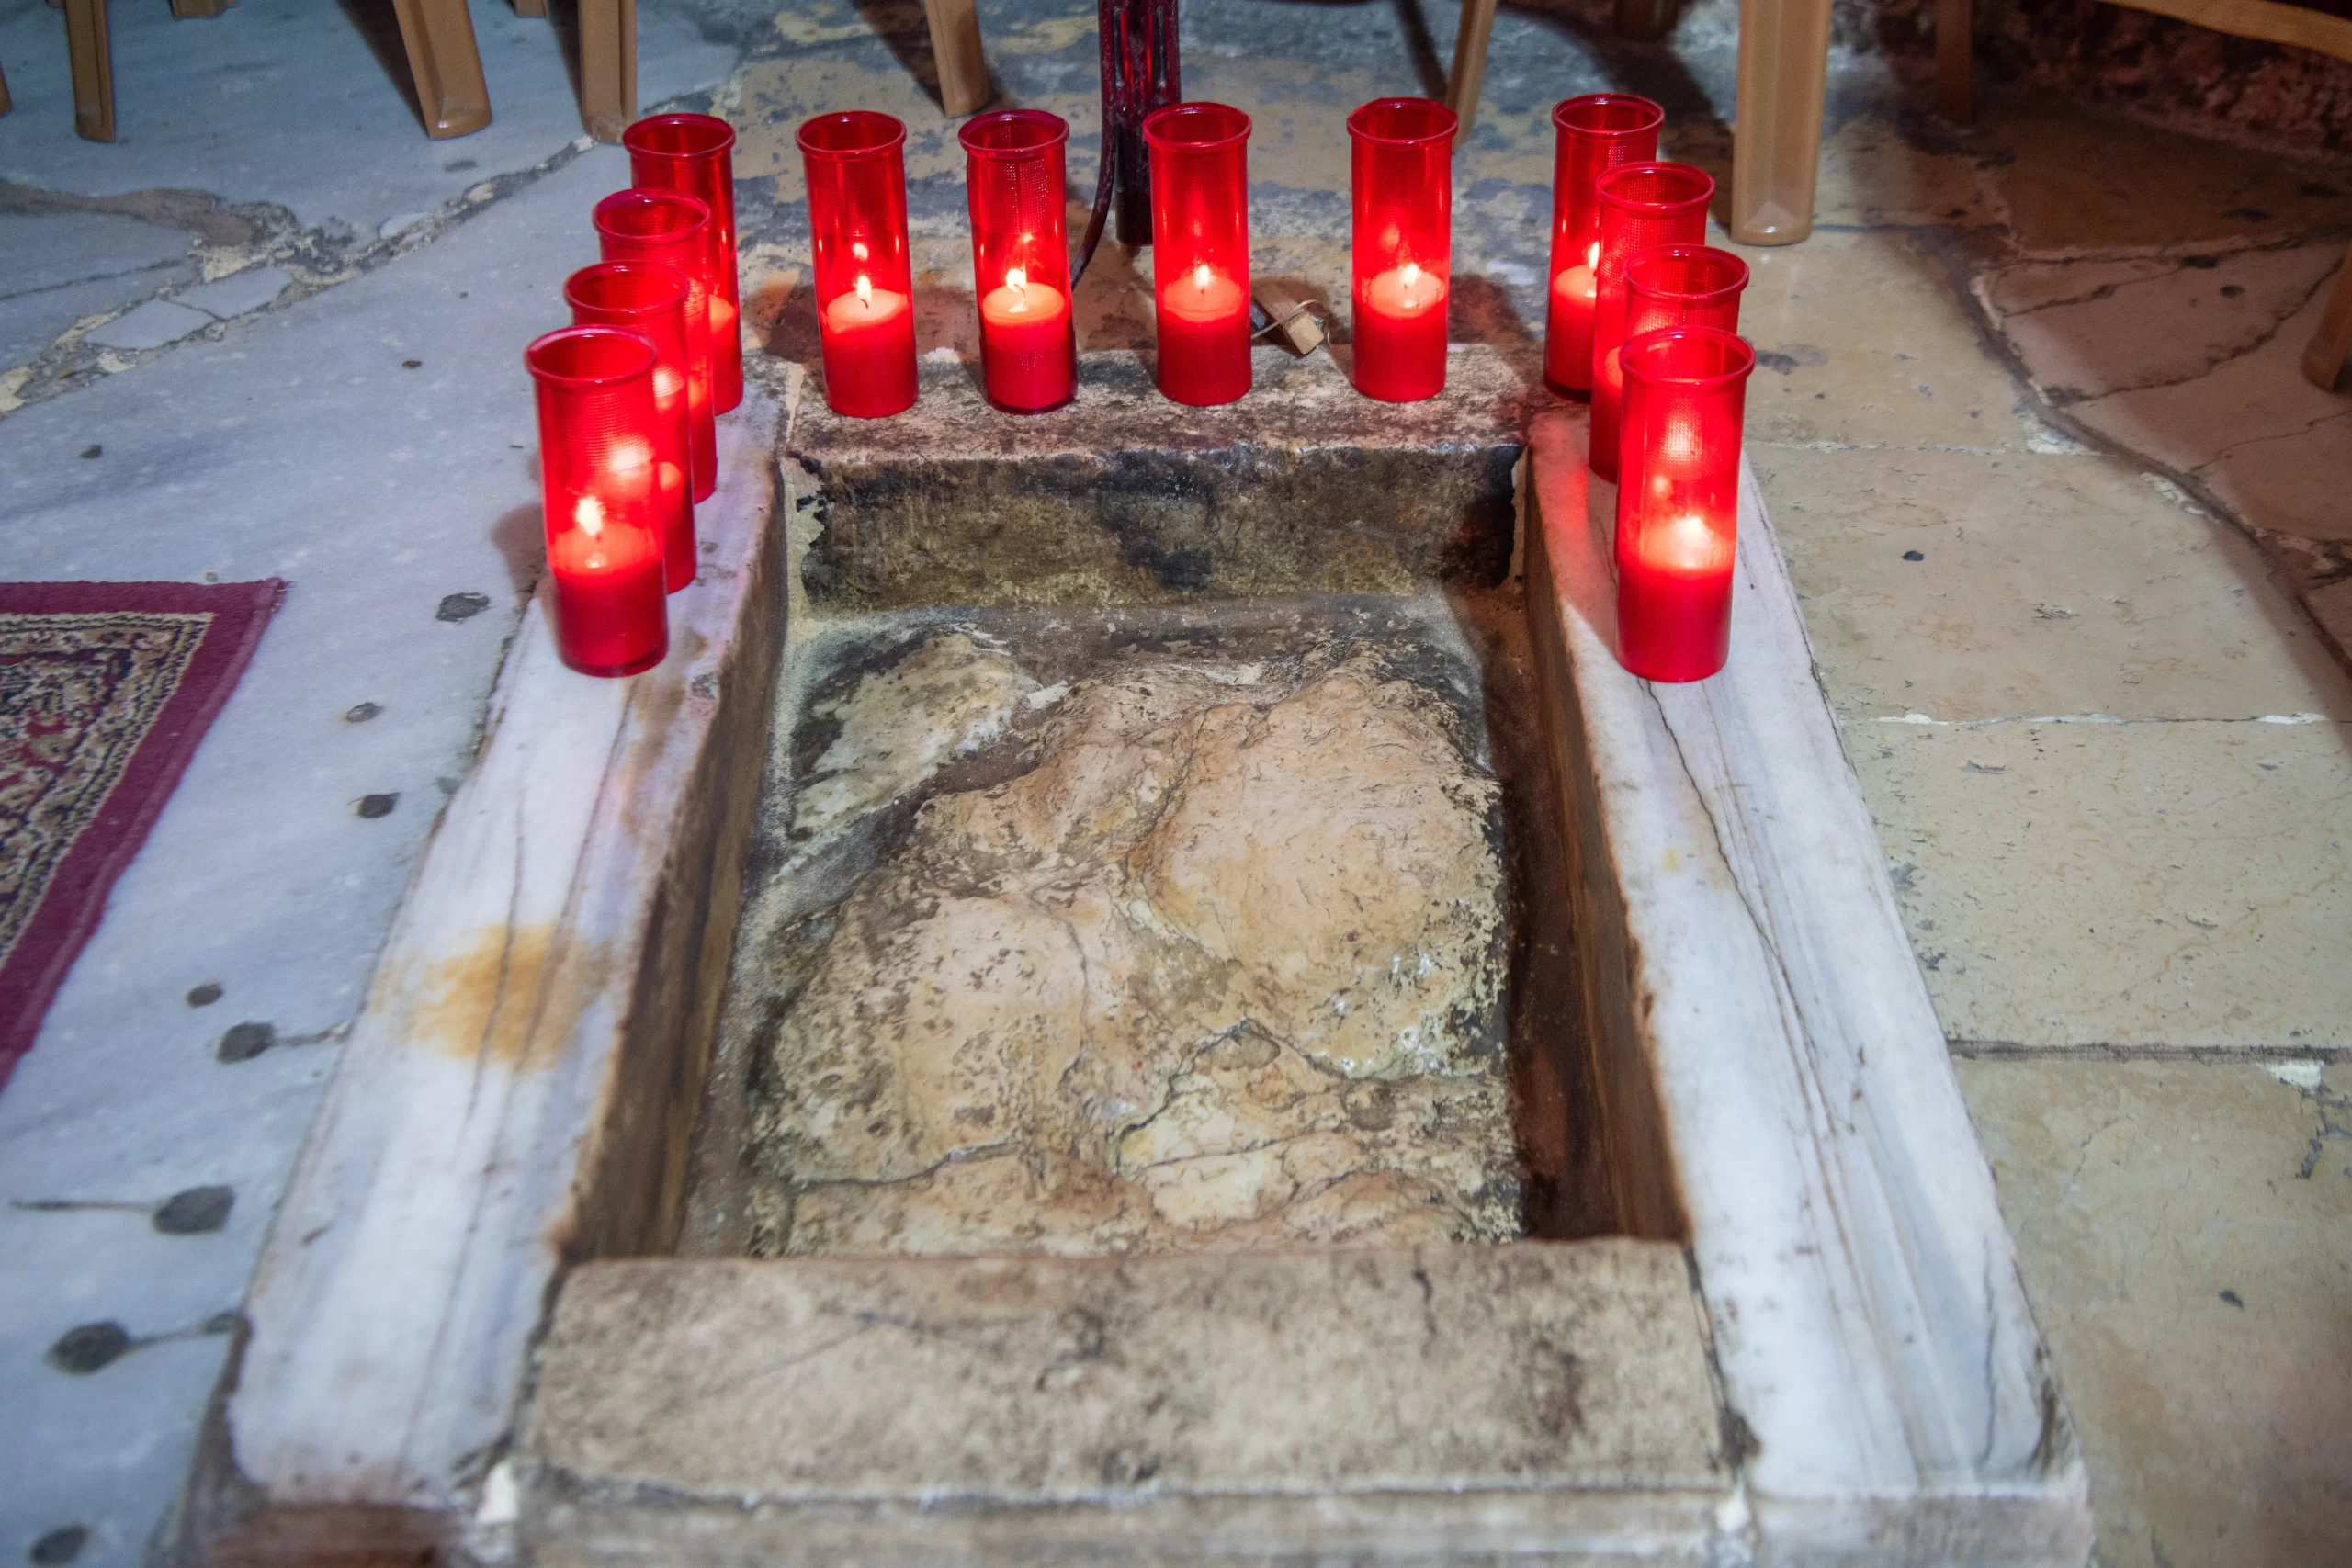 The rock venerated inside the Chapel of the Ascension, on the Mount of Olives, in Jerusalem. According to tradition, the last earthly footprint of Jesus before ascending to Heaven is imprinted on this rock. Credit: Marinella Bandini